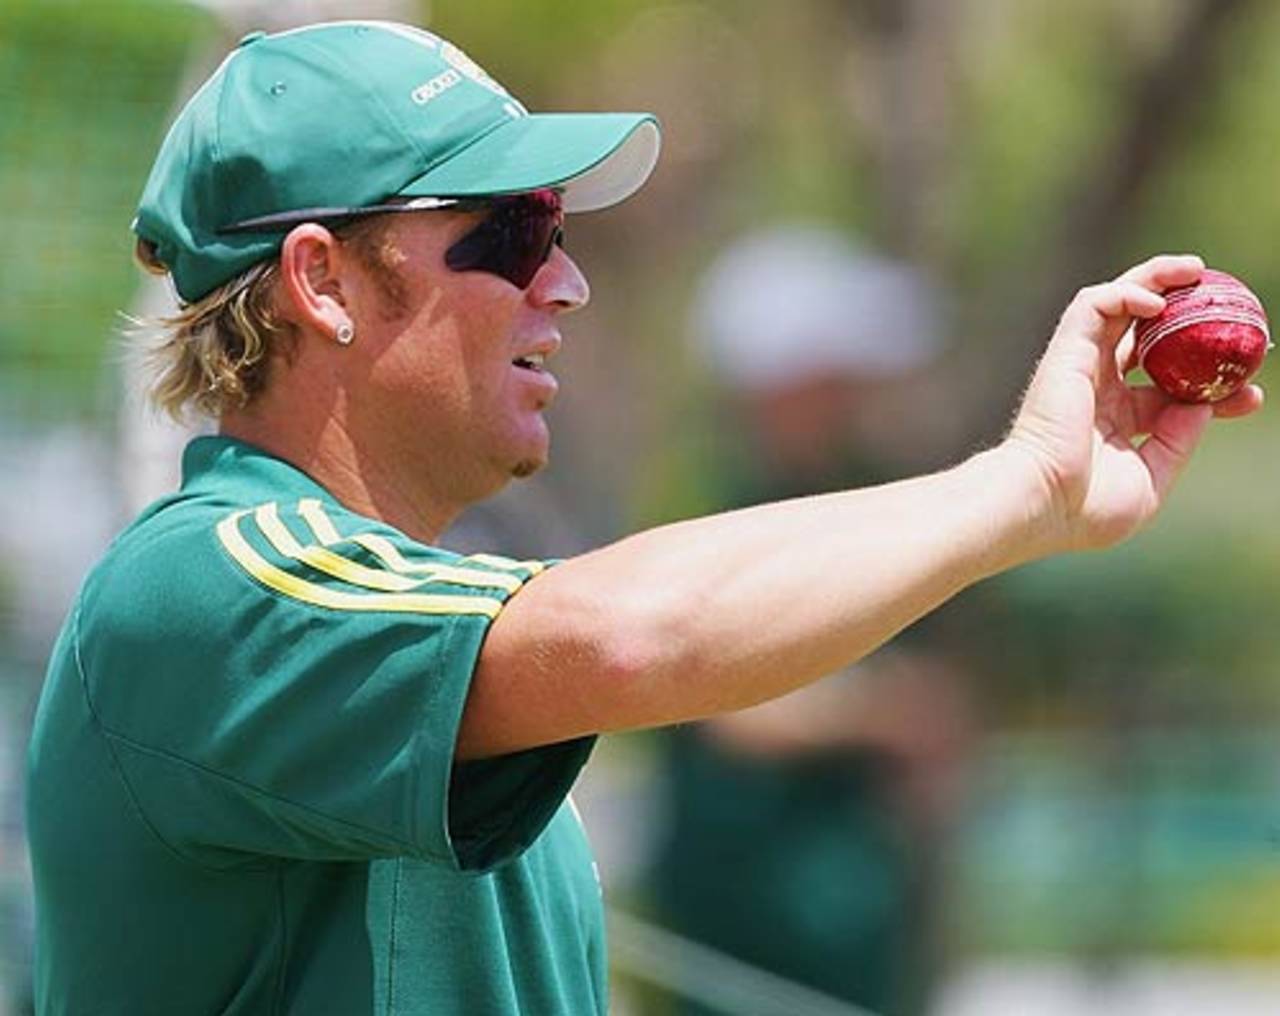 Shane Warne got wickets two and a half overs faster in the 2000s than he did in the 1990s&nbsp;&nbsp;&bull;&nbsp;&nbsp;Hamish Blair/Getty Images